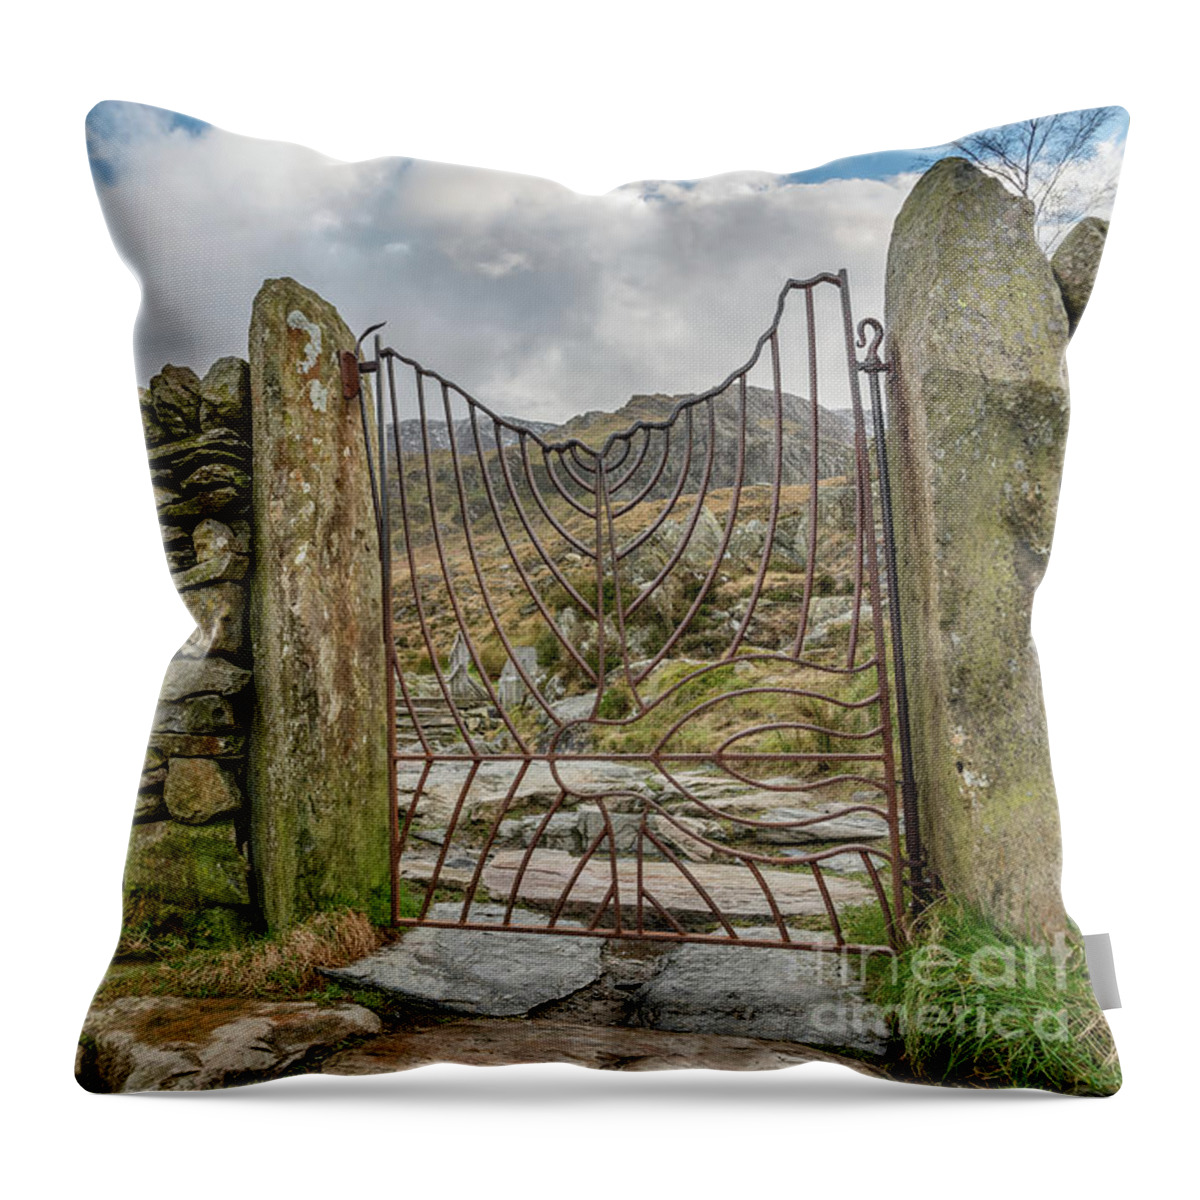 Tryfan Mountain Throw Pillow featuring the photograph Decorative Gate Snowdonia by Adrian Evans